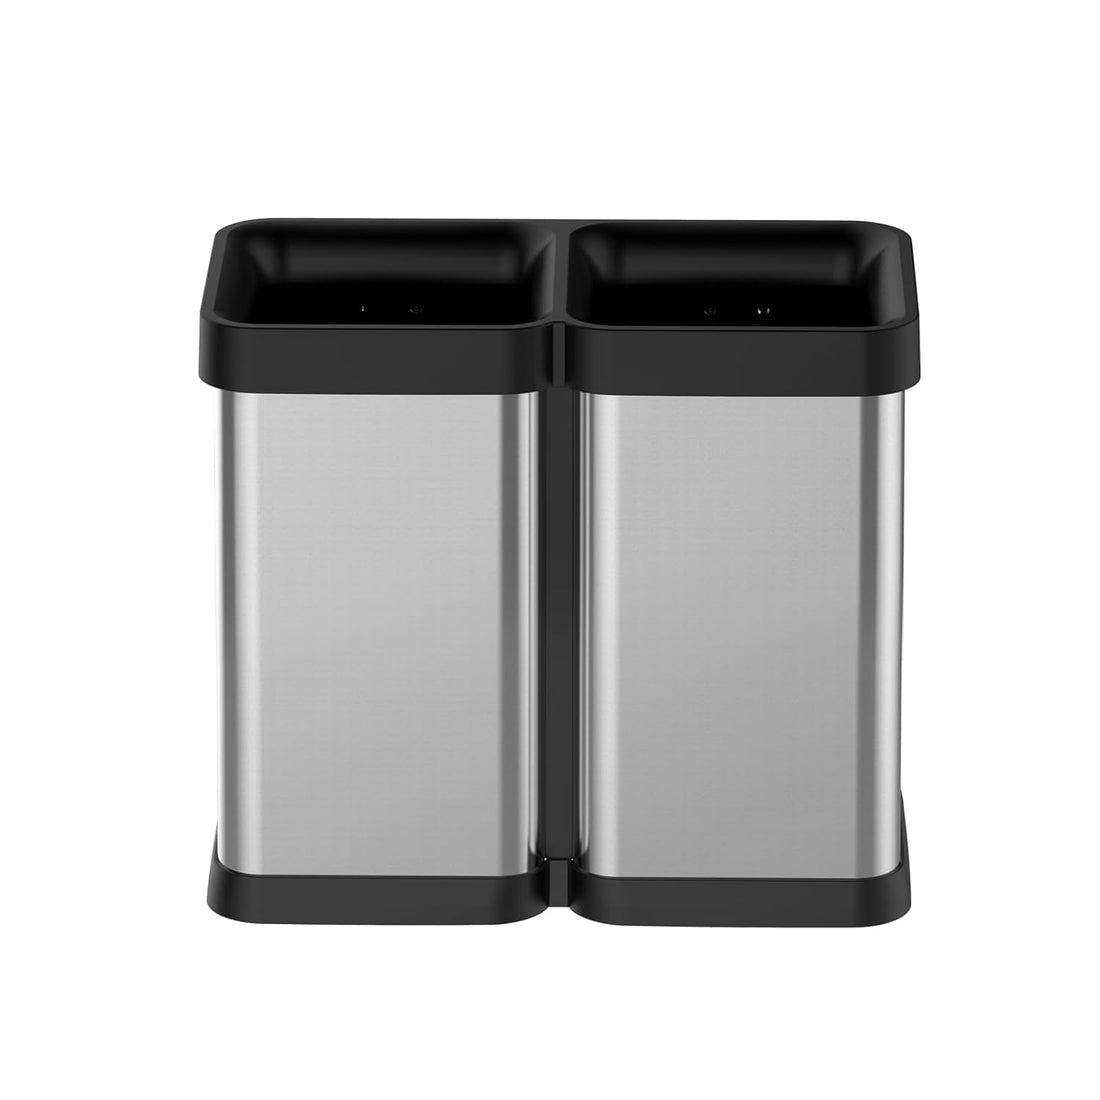 2x6.6 Gallon Kitchen Trash Can, Dual Compartment Waste Bins, Open Top, No Lid Stainless Steel Trash Bin for Kitchen, Office, Restaurant